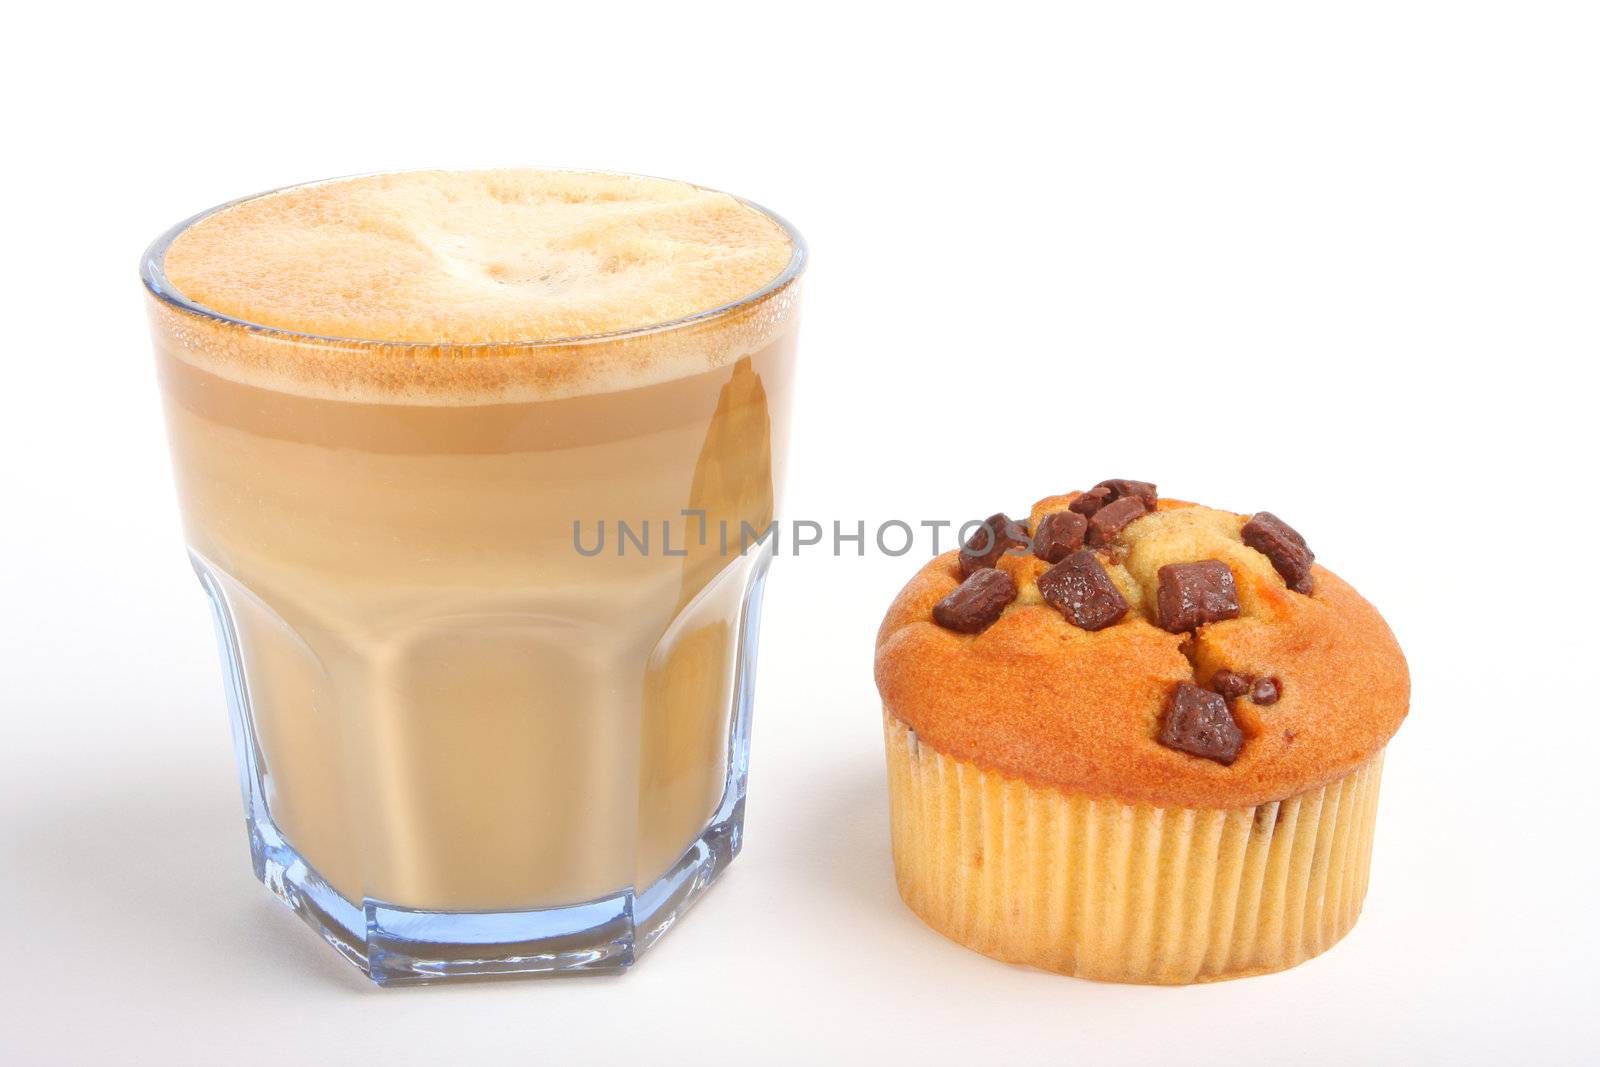  a cup of coffee with muffin, isolated on white in a studio 